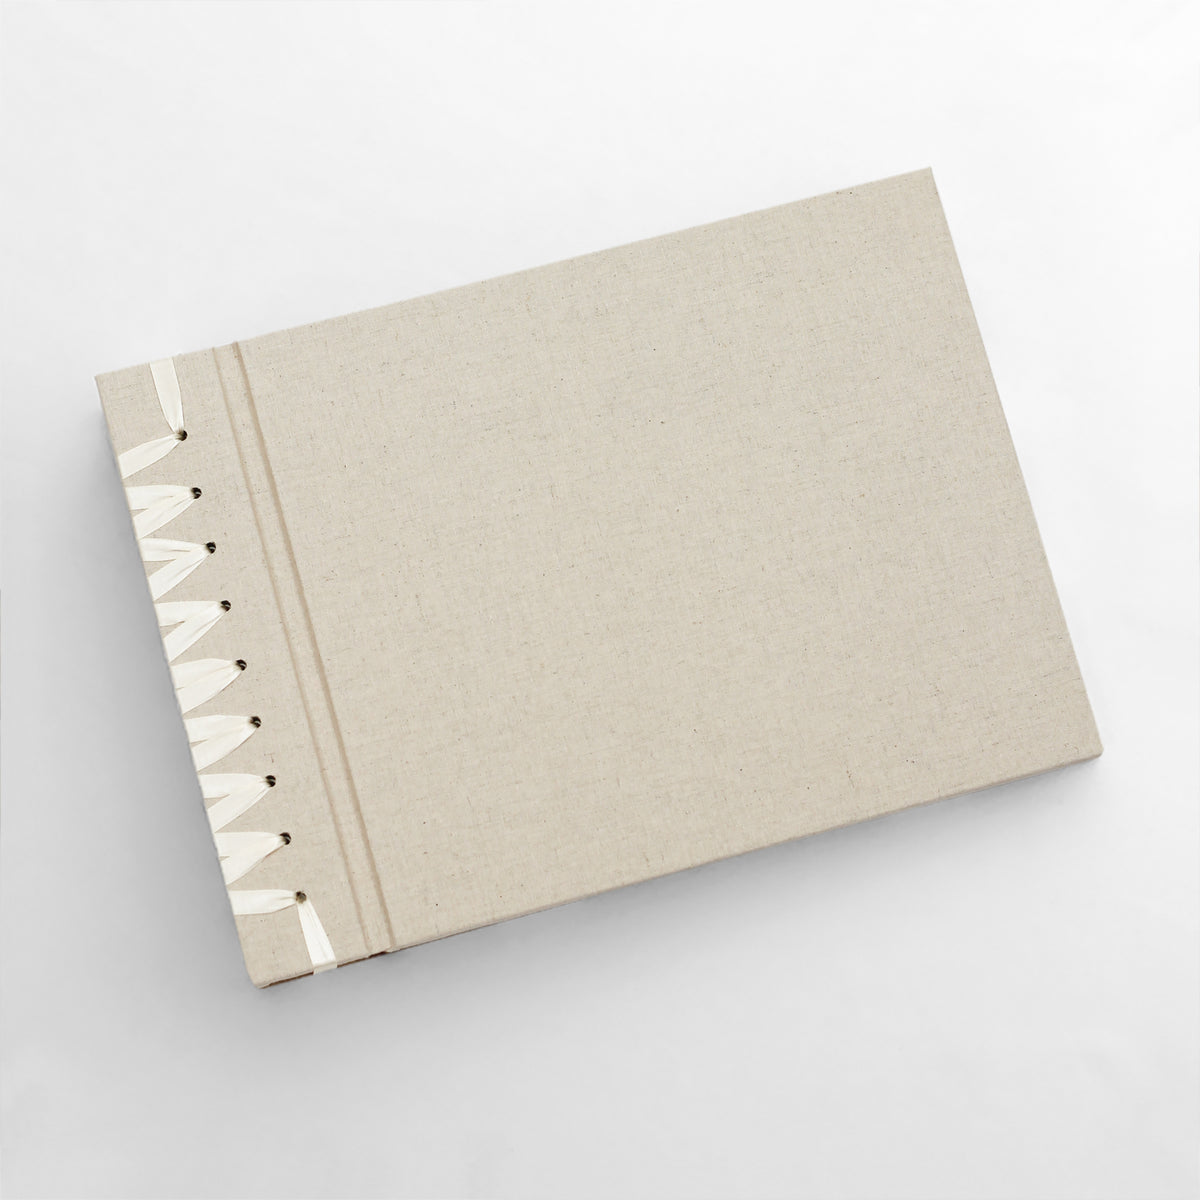 Large 10 x 15 Paper Page Album | Cover: Natural Linen | Available Personalized